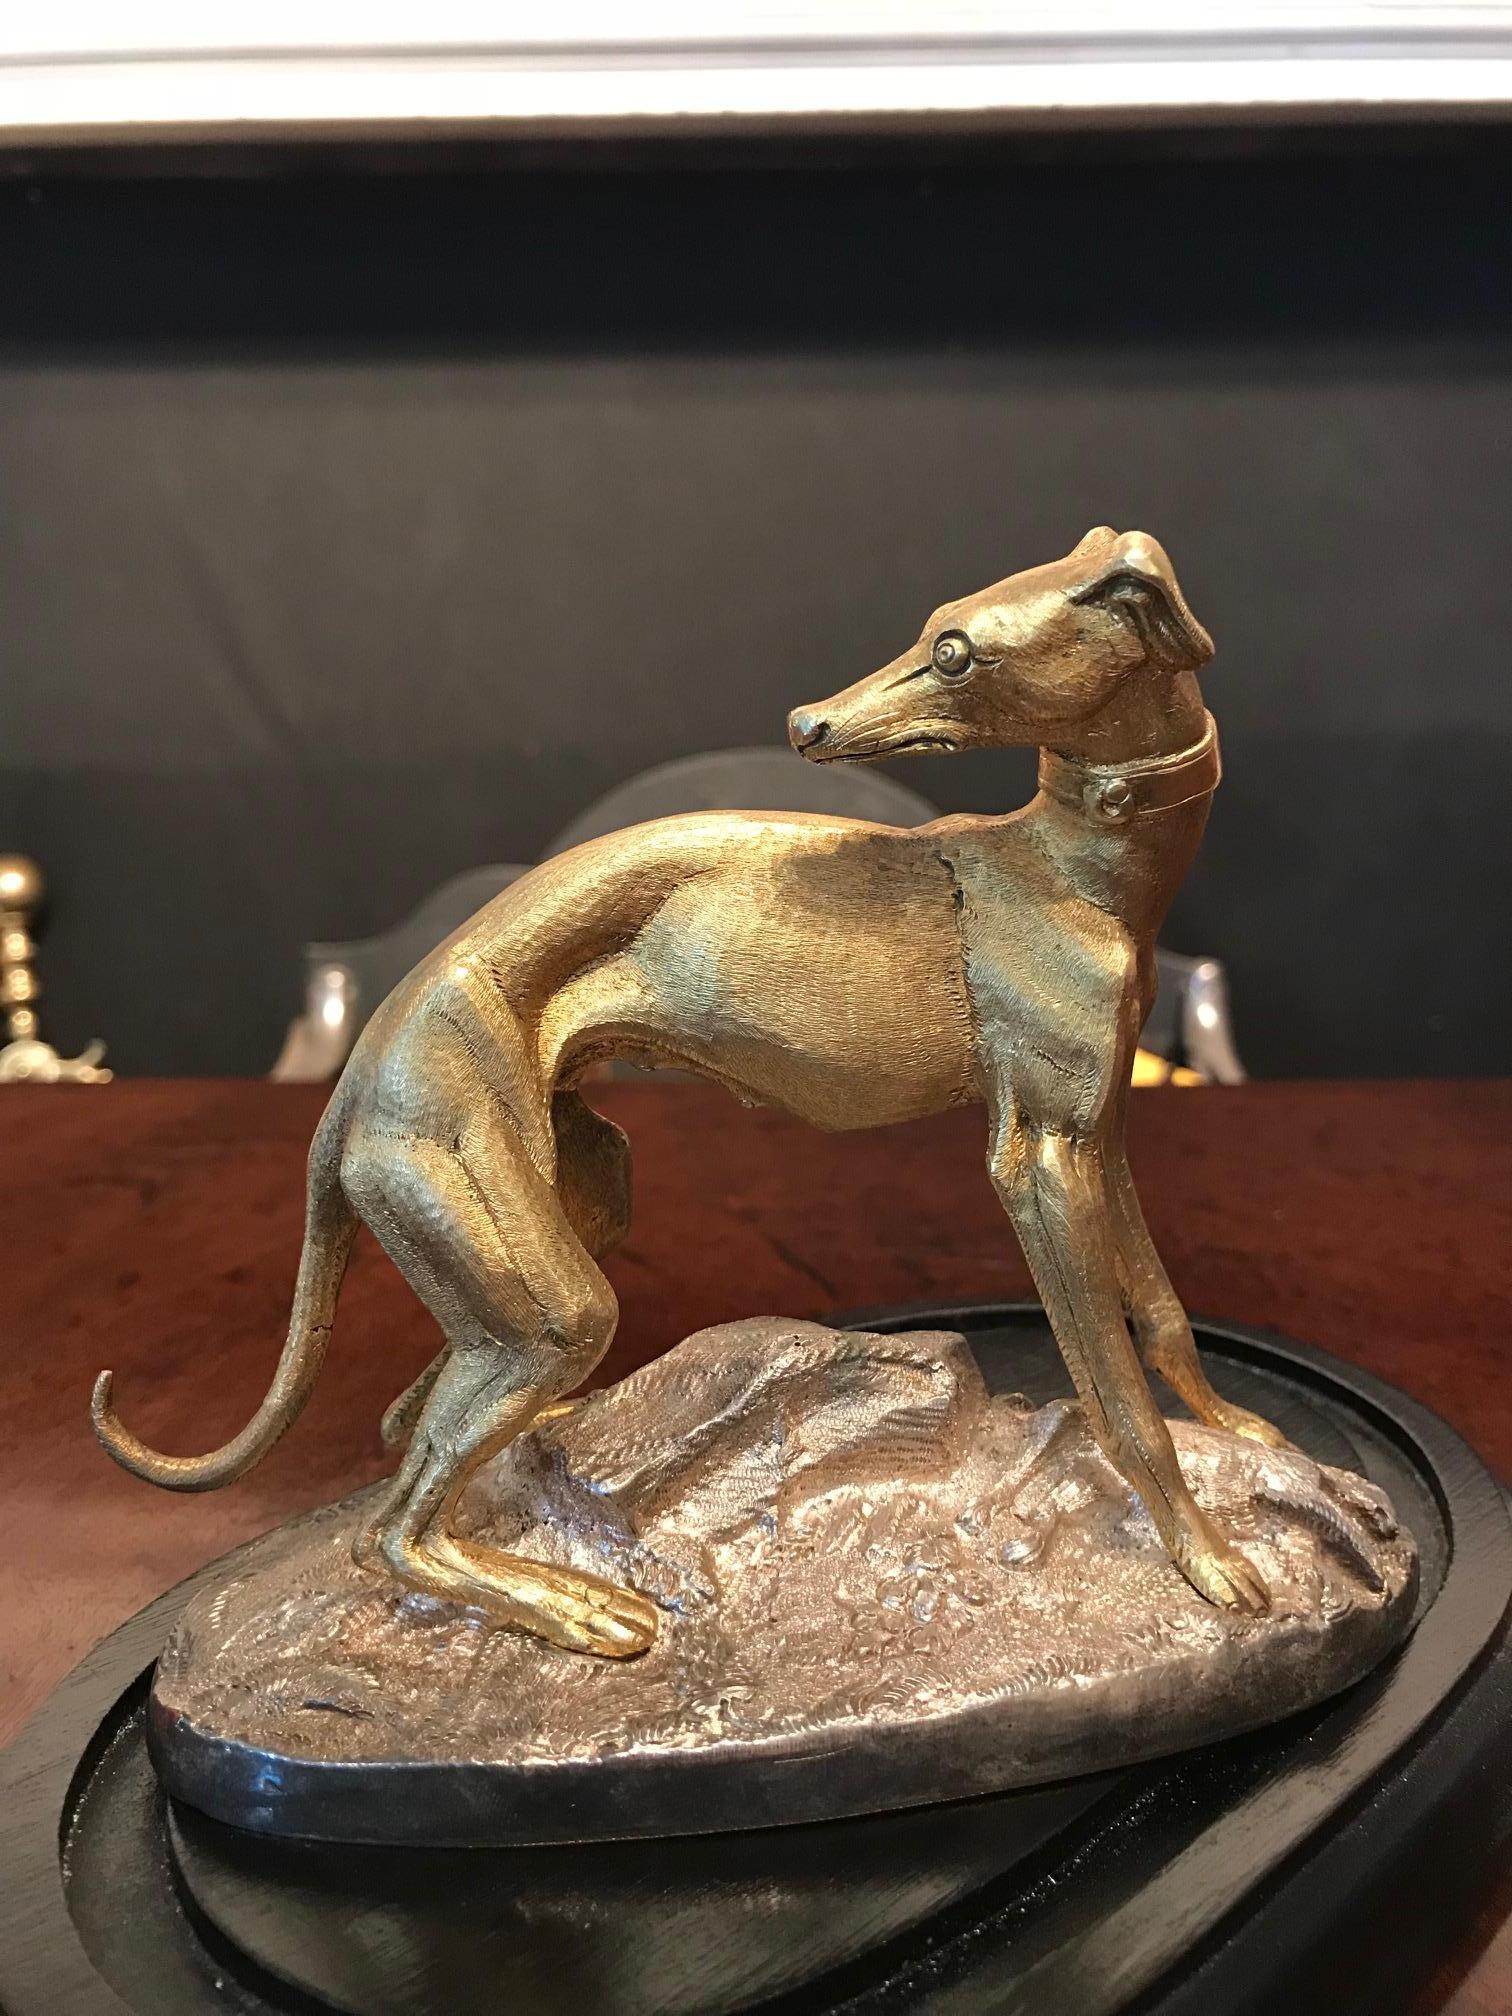 Early 19th century Regency gilt bronze statue in the form of a whippet presented within period glass cloche dome bell jar display case supported on fitted mahogany base.